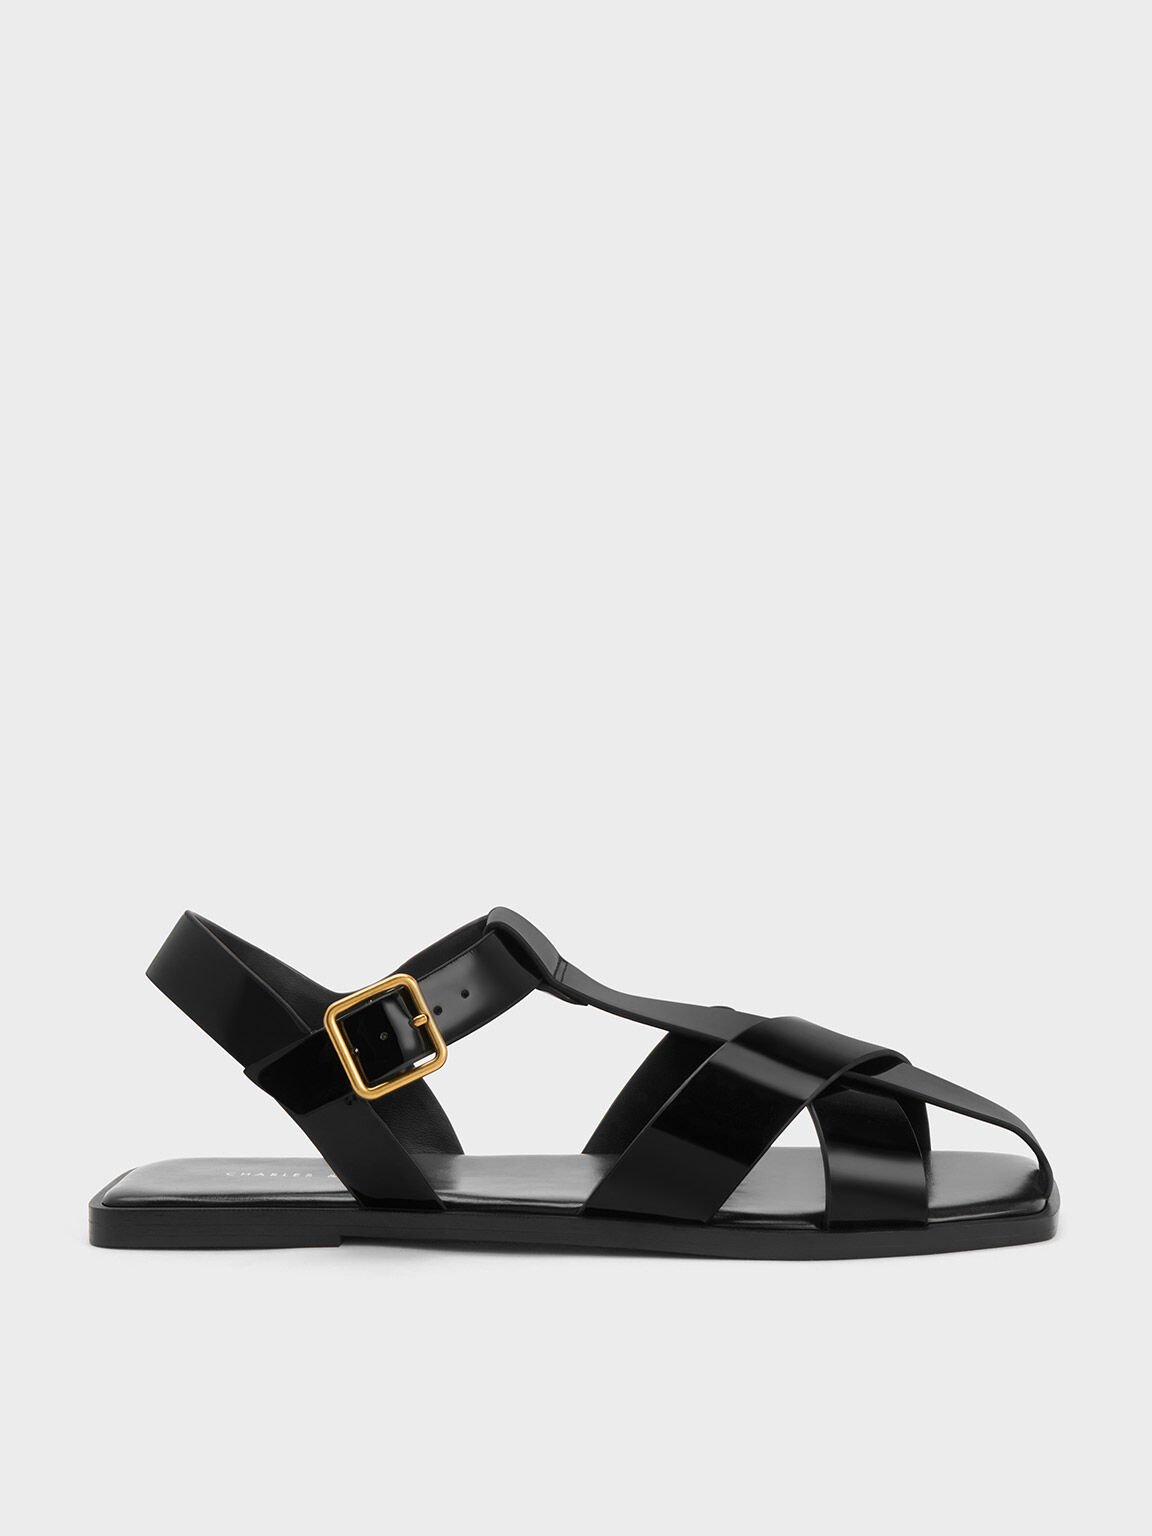 Patent Strappy Crossover Sandals, Black Patent, hi-res